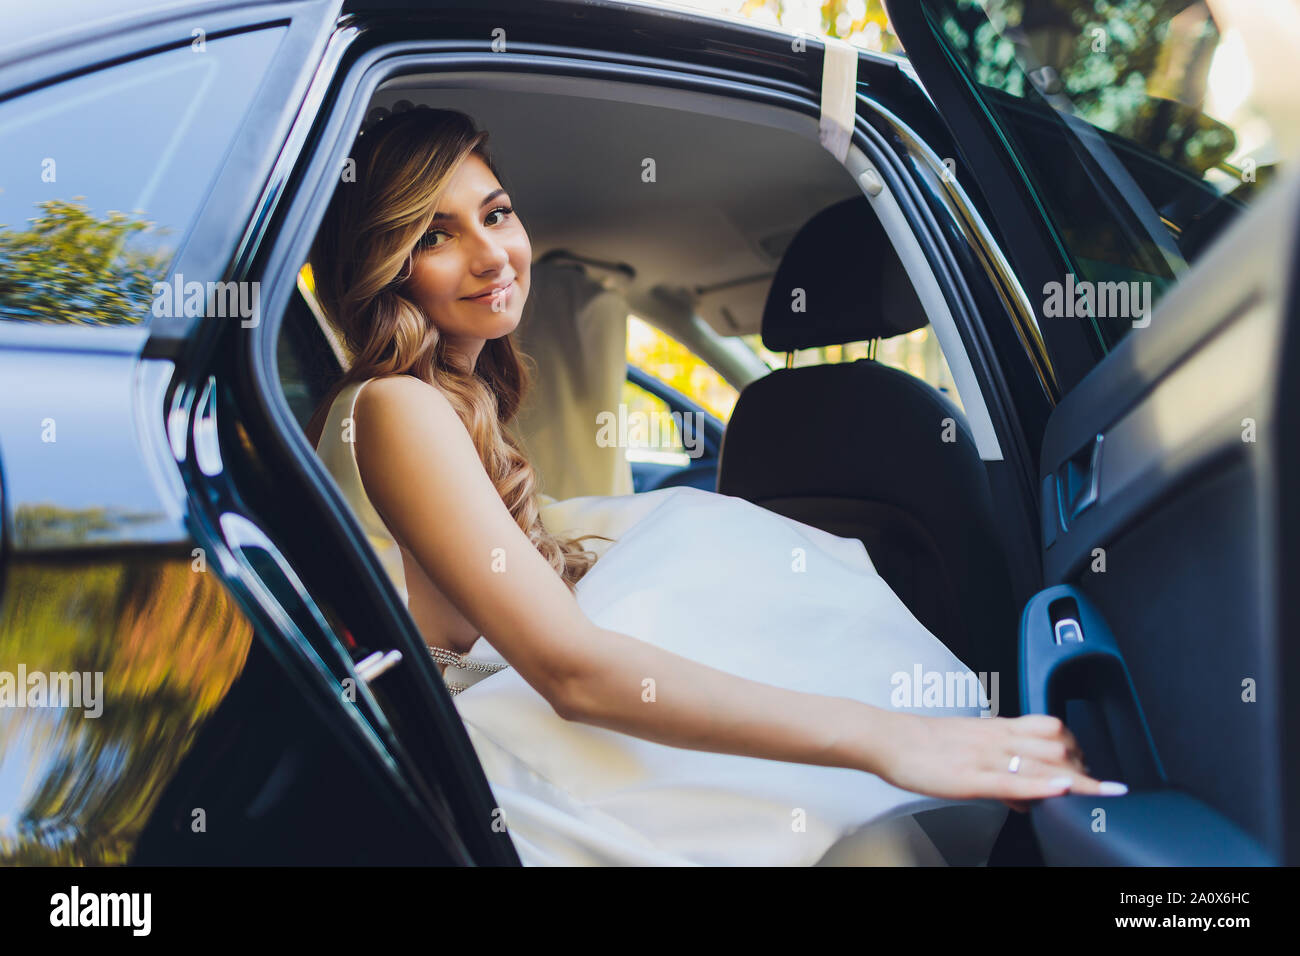 A bride takes pictures in the black car. Stock Photo